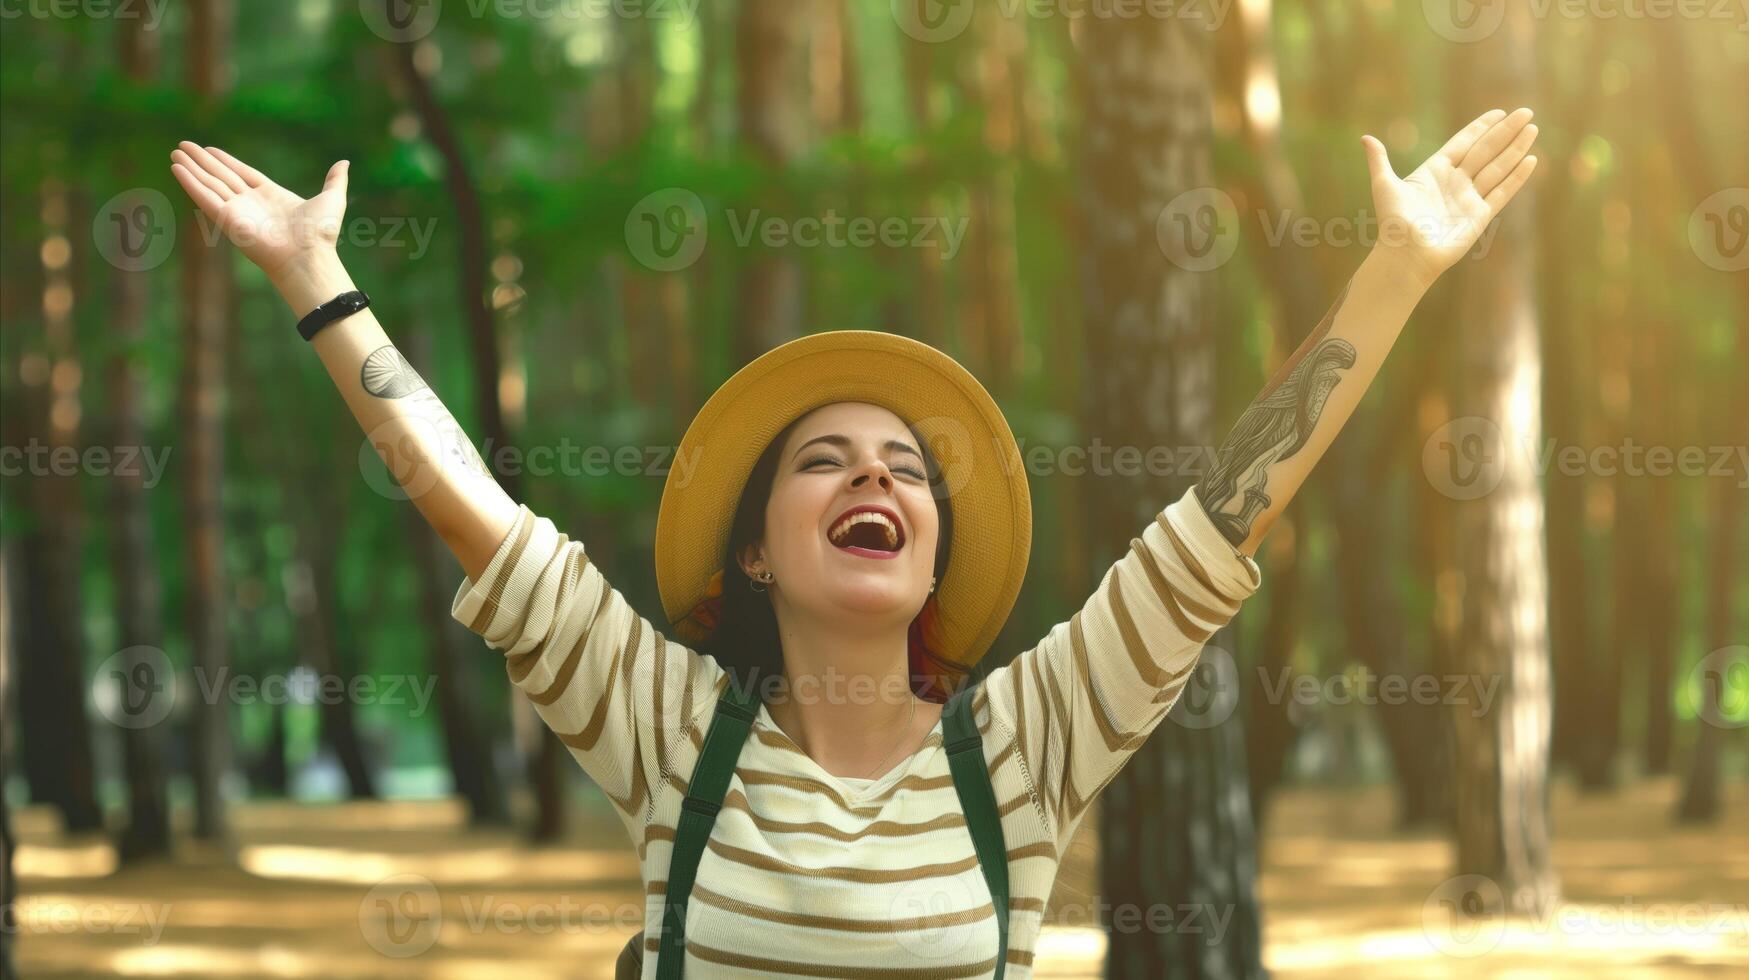 Joyful Woman Embracing Nature in Sunlit Forest photo